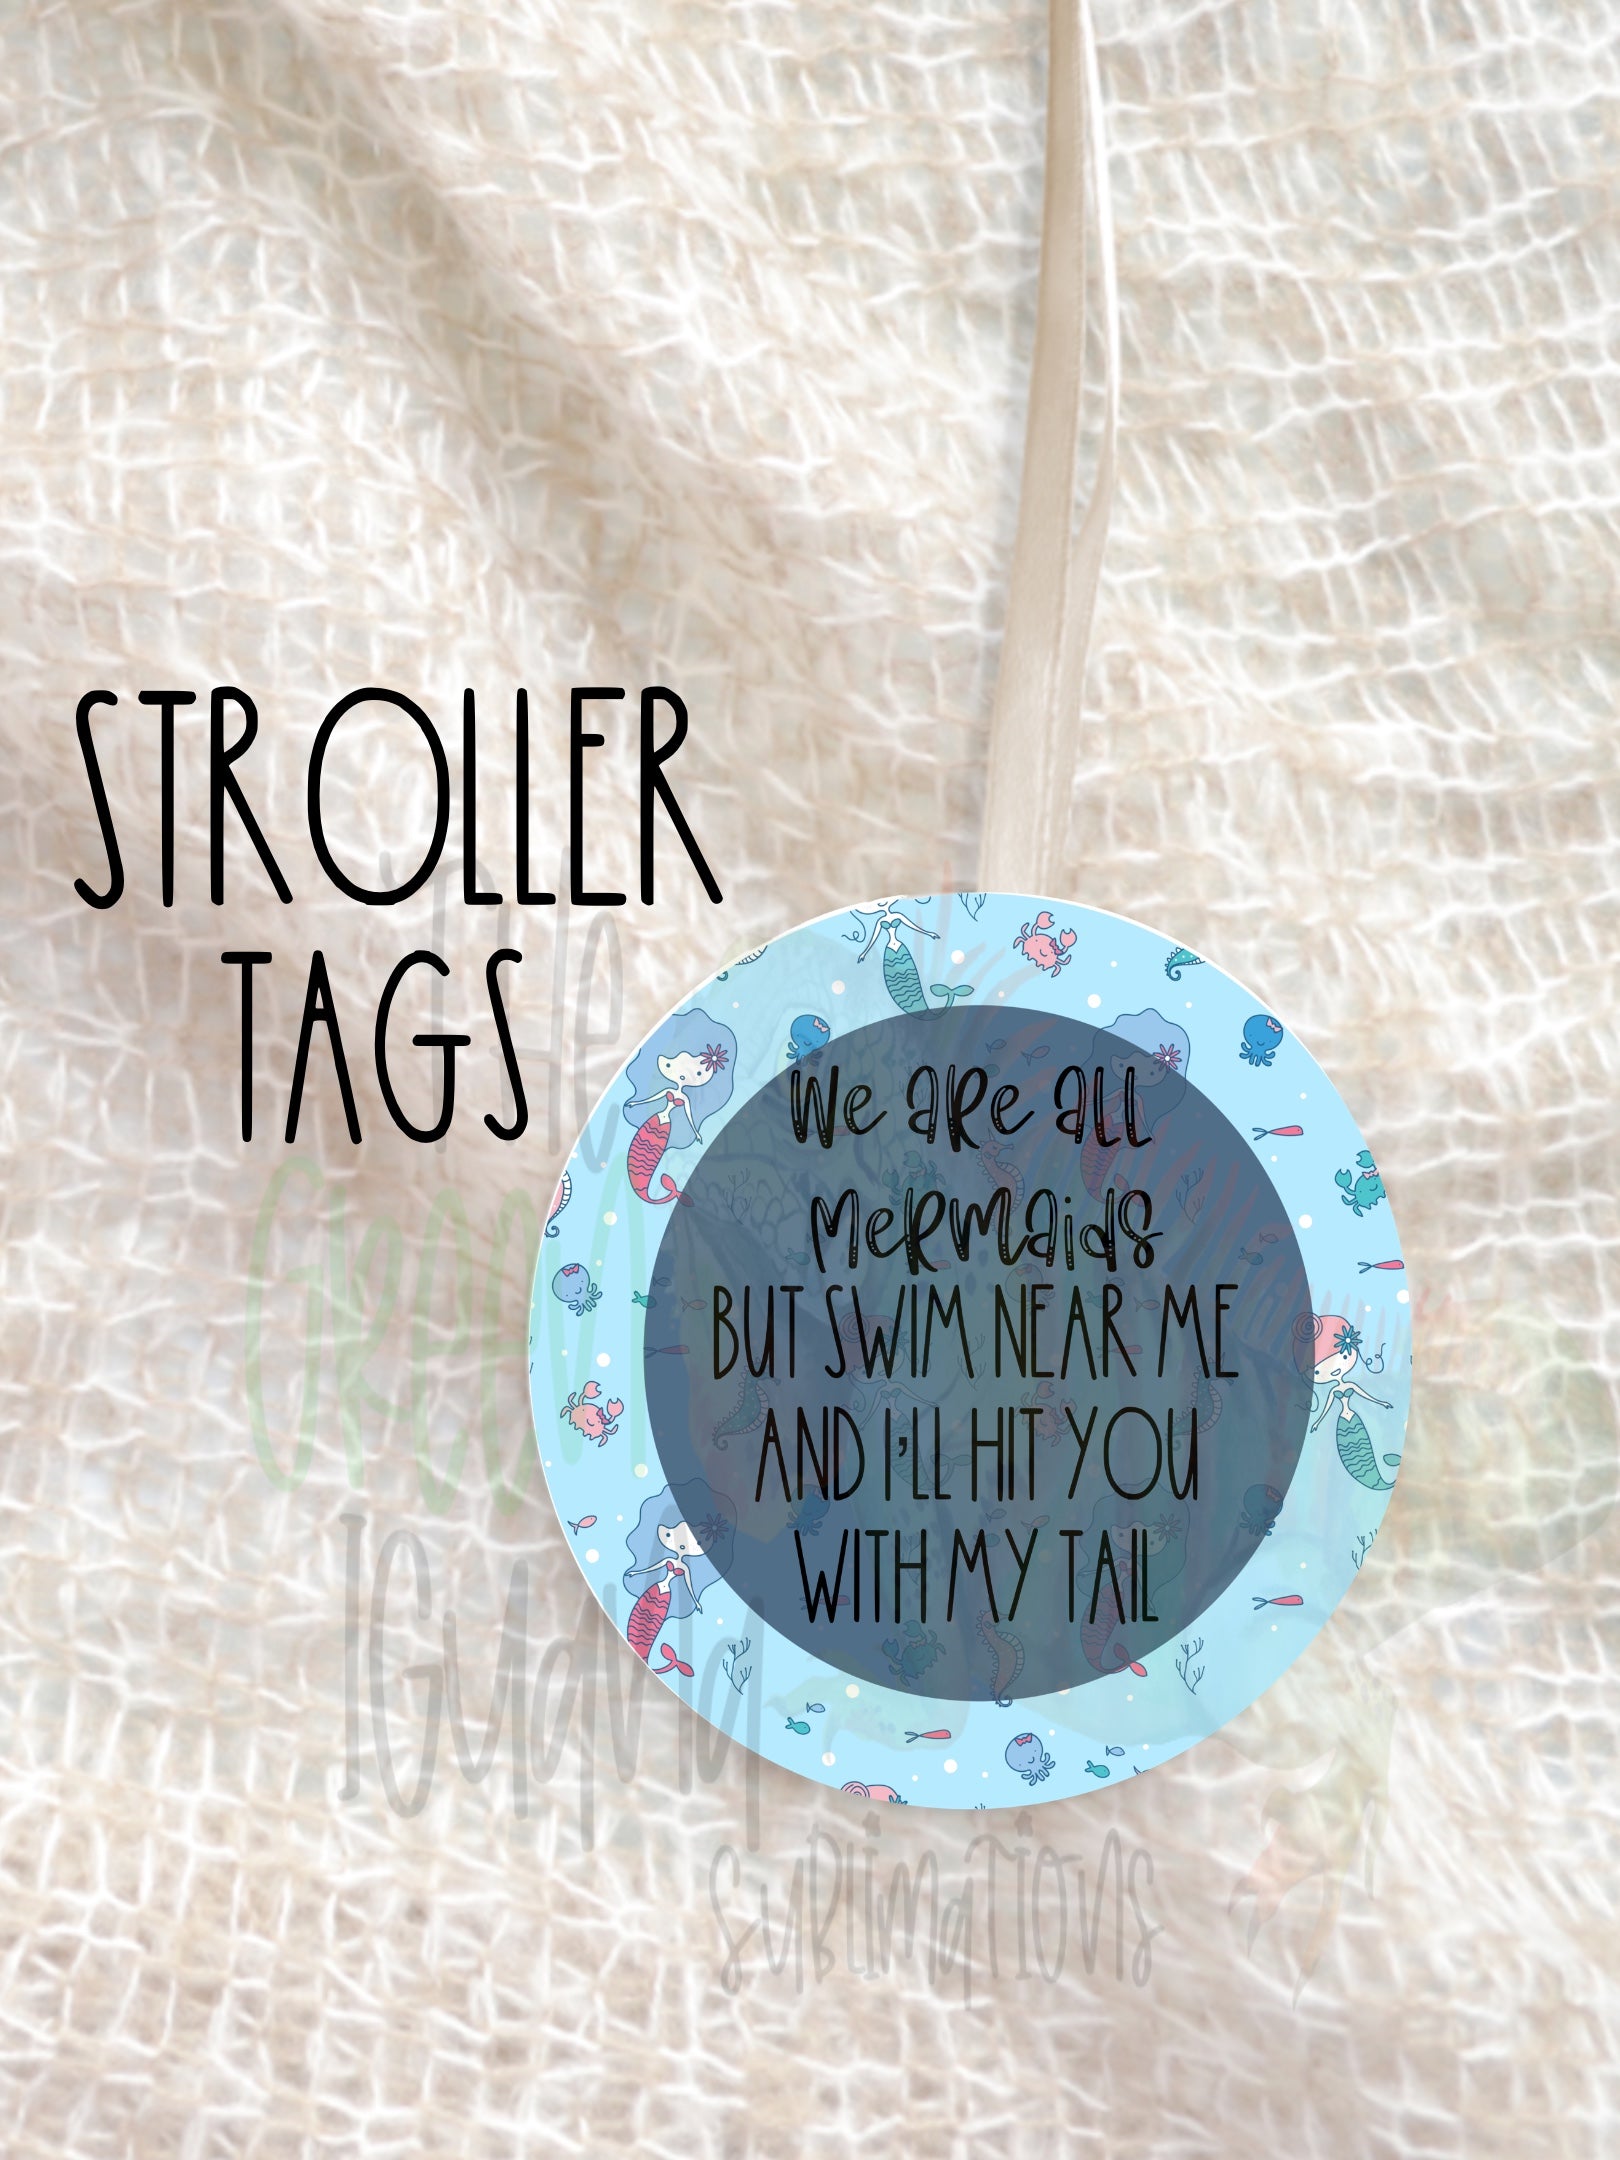 We are all mermaids - Stroller tag